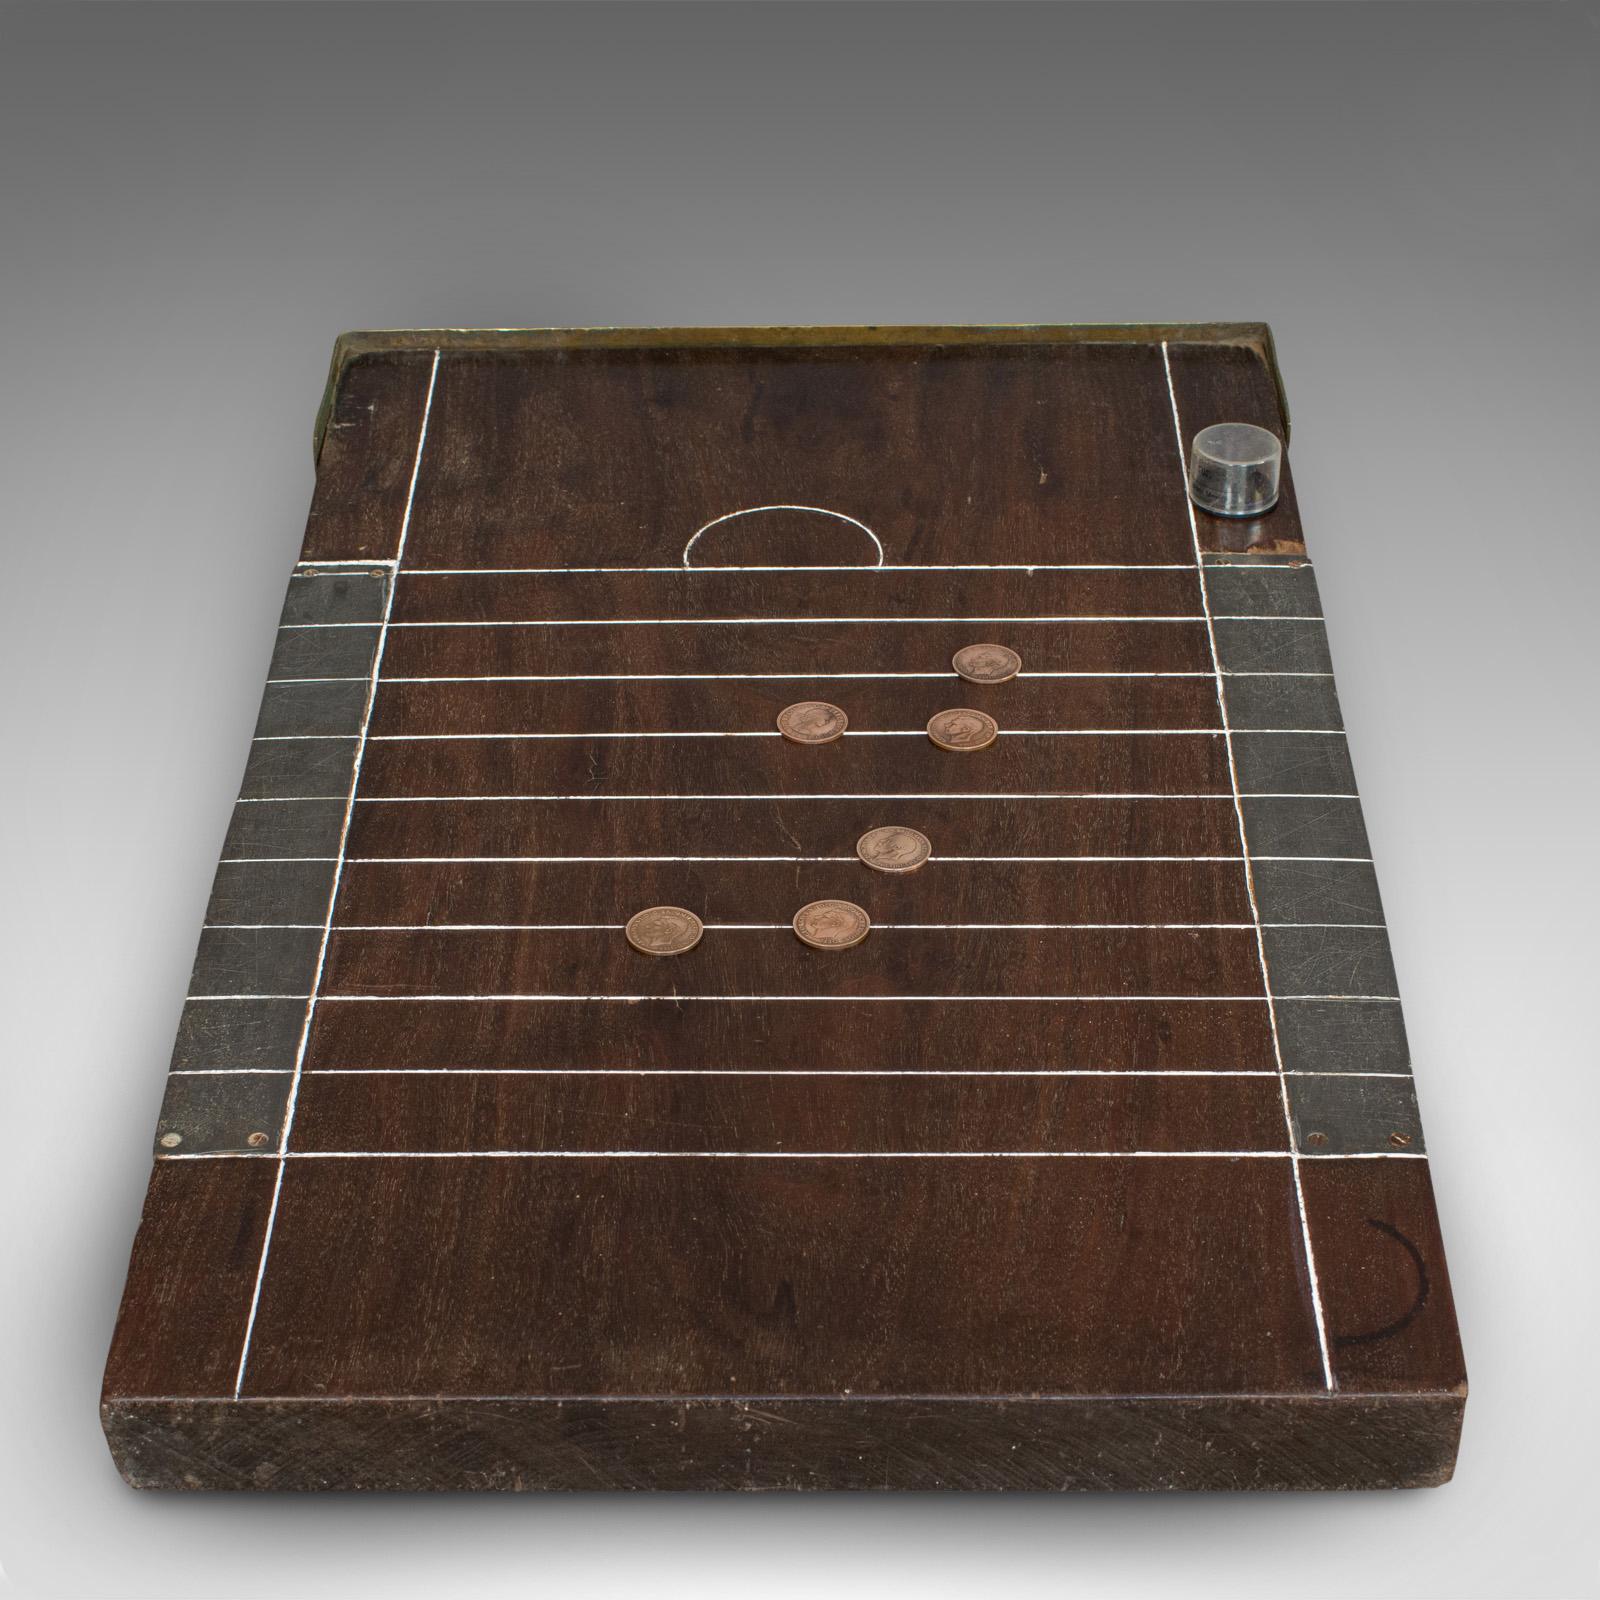 This is an antique shove ha'penny board. An English, mahogany travel gaming table with coins, dating to the late 19th century, circa 1900.

A classic, elegant gaming board 
Displays a desirable aged patina
Rich mahogany hues with fine grain